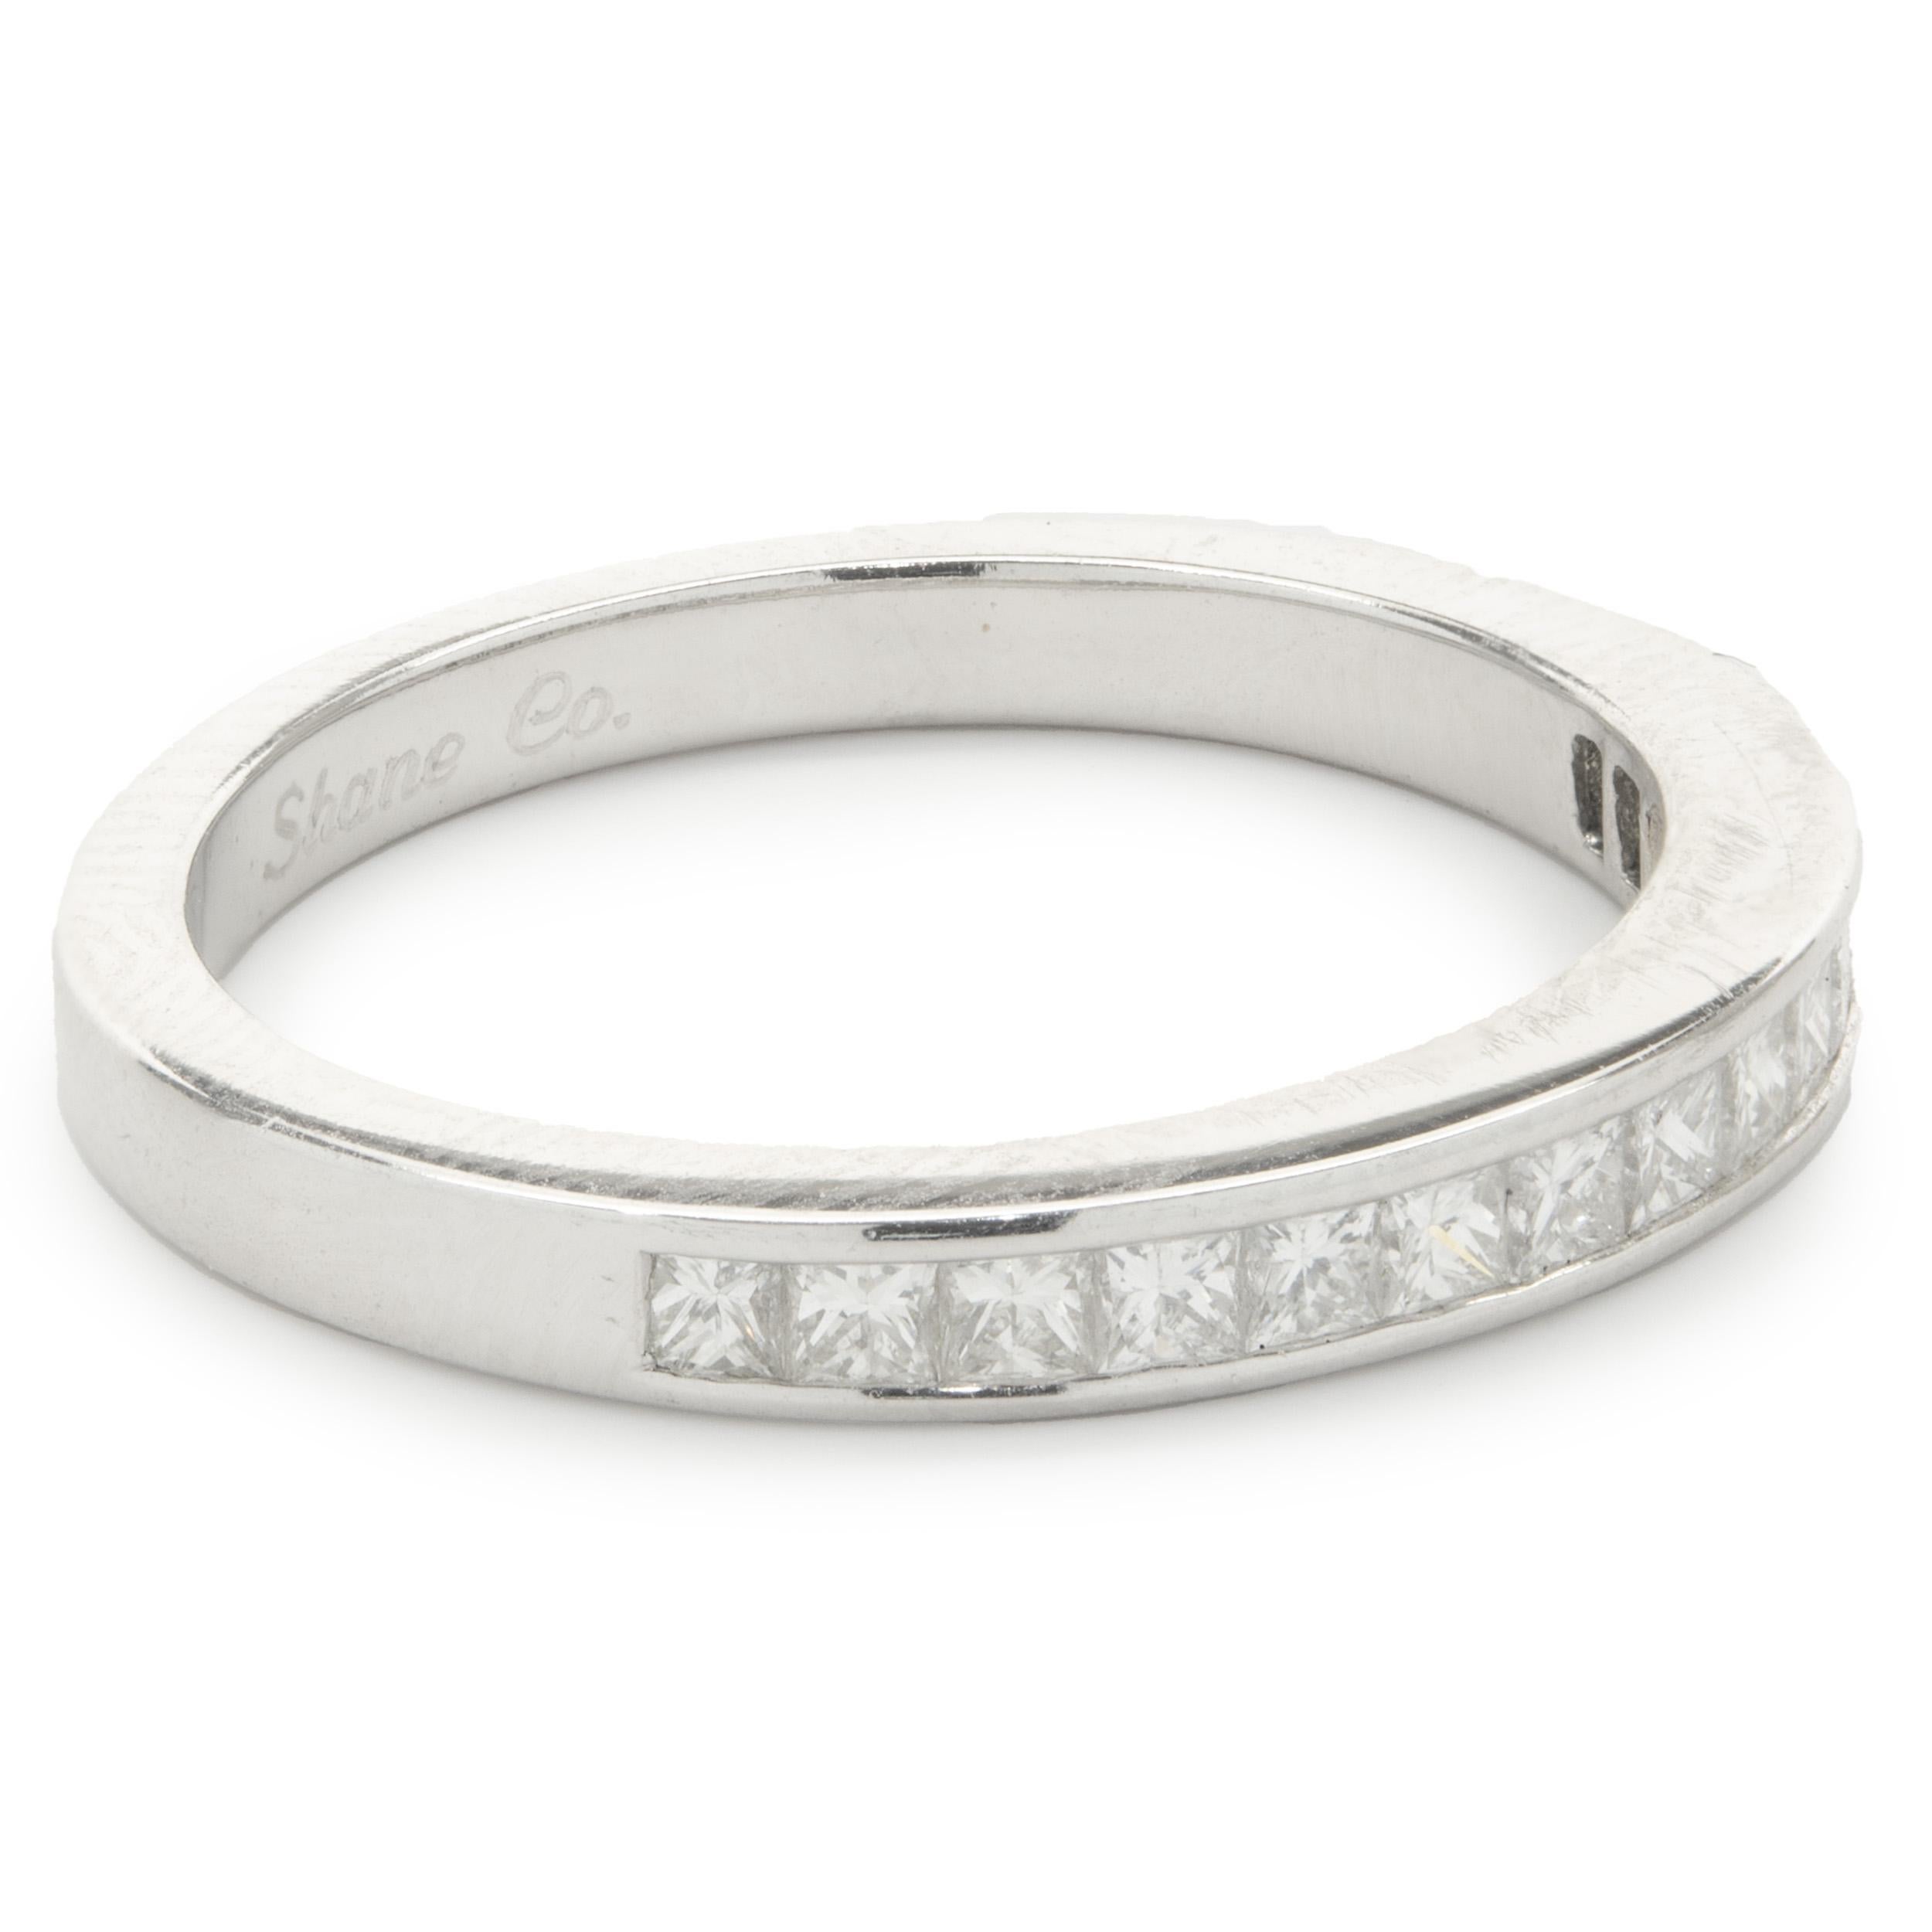 Designer: custom
Material: 14K white gold
Diamond: 15 princess cut = 0.45cttw
Color: G
Clarity: SI1
Size: 5.25 complimentary sizing available 
Weight: 2.53 grams